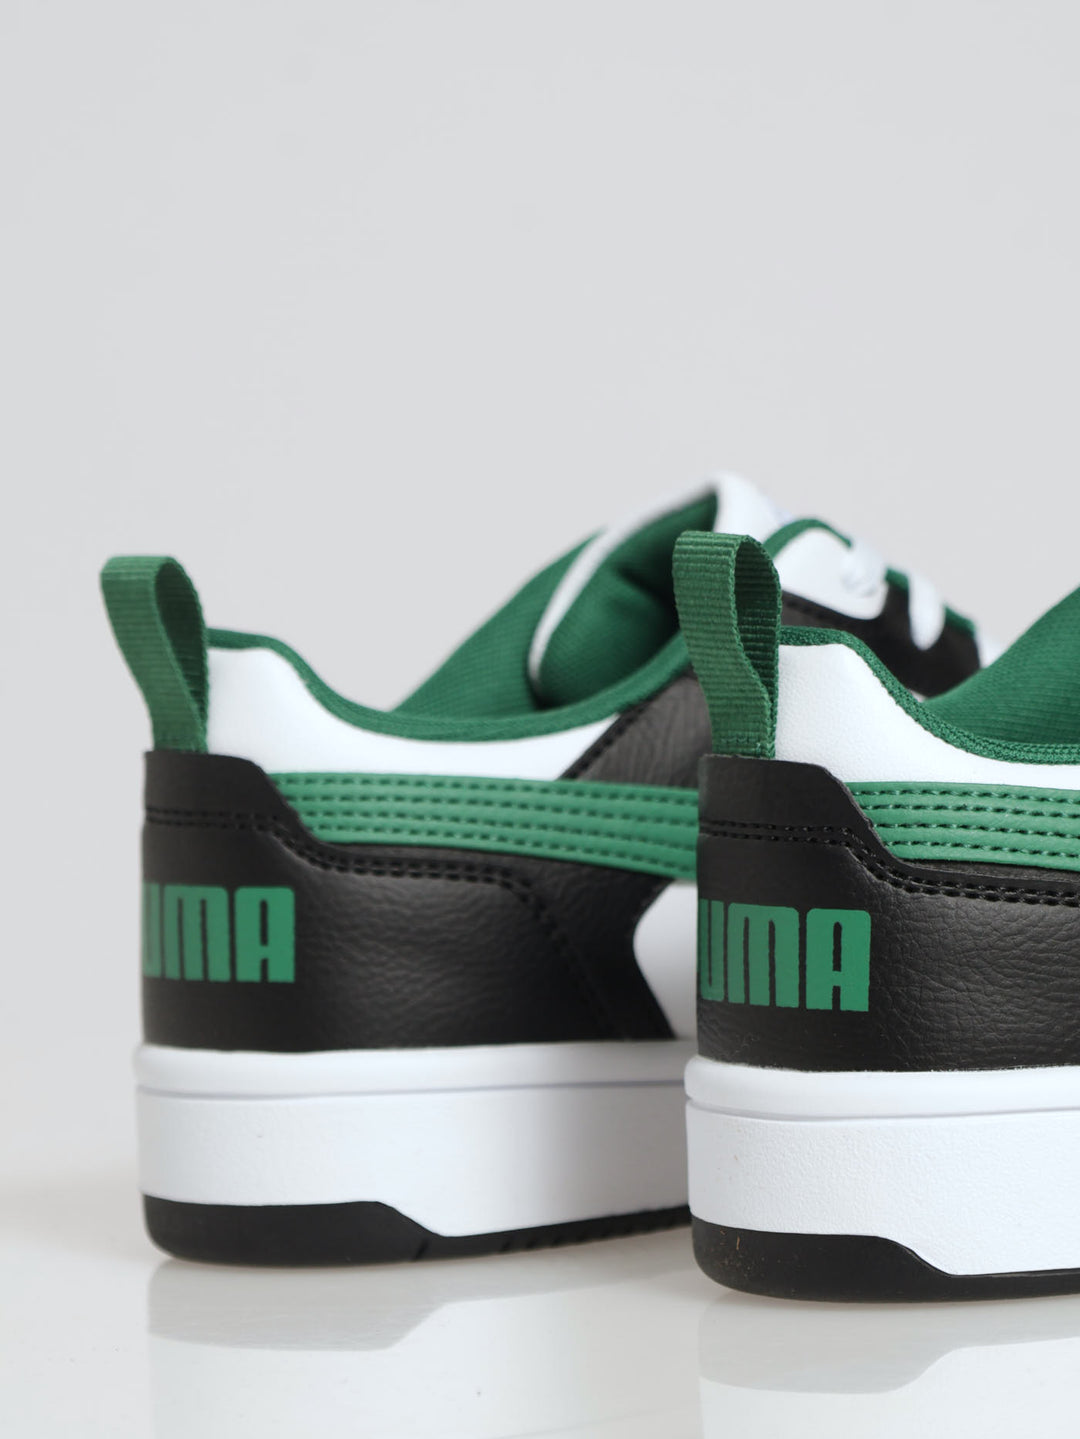 Lo Chunky Closed Toe Lace Up Sneaker - White/Green